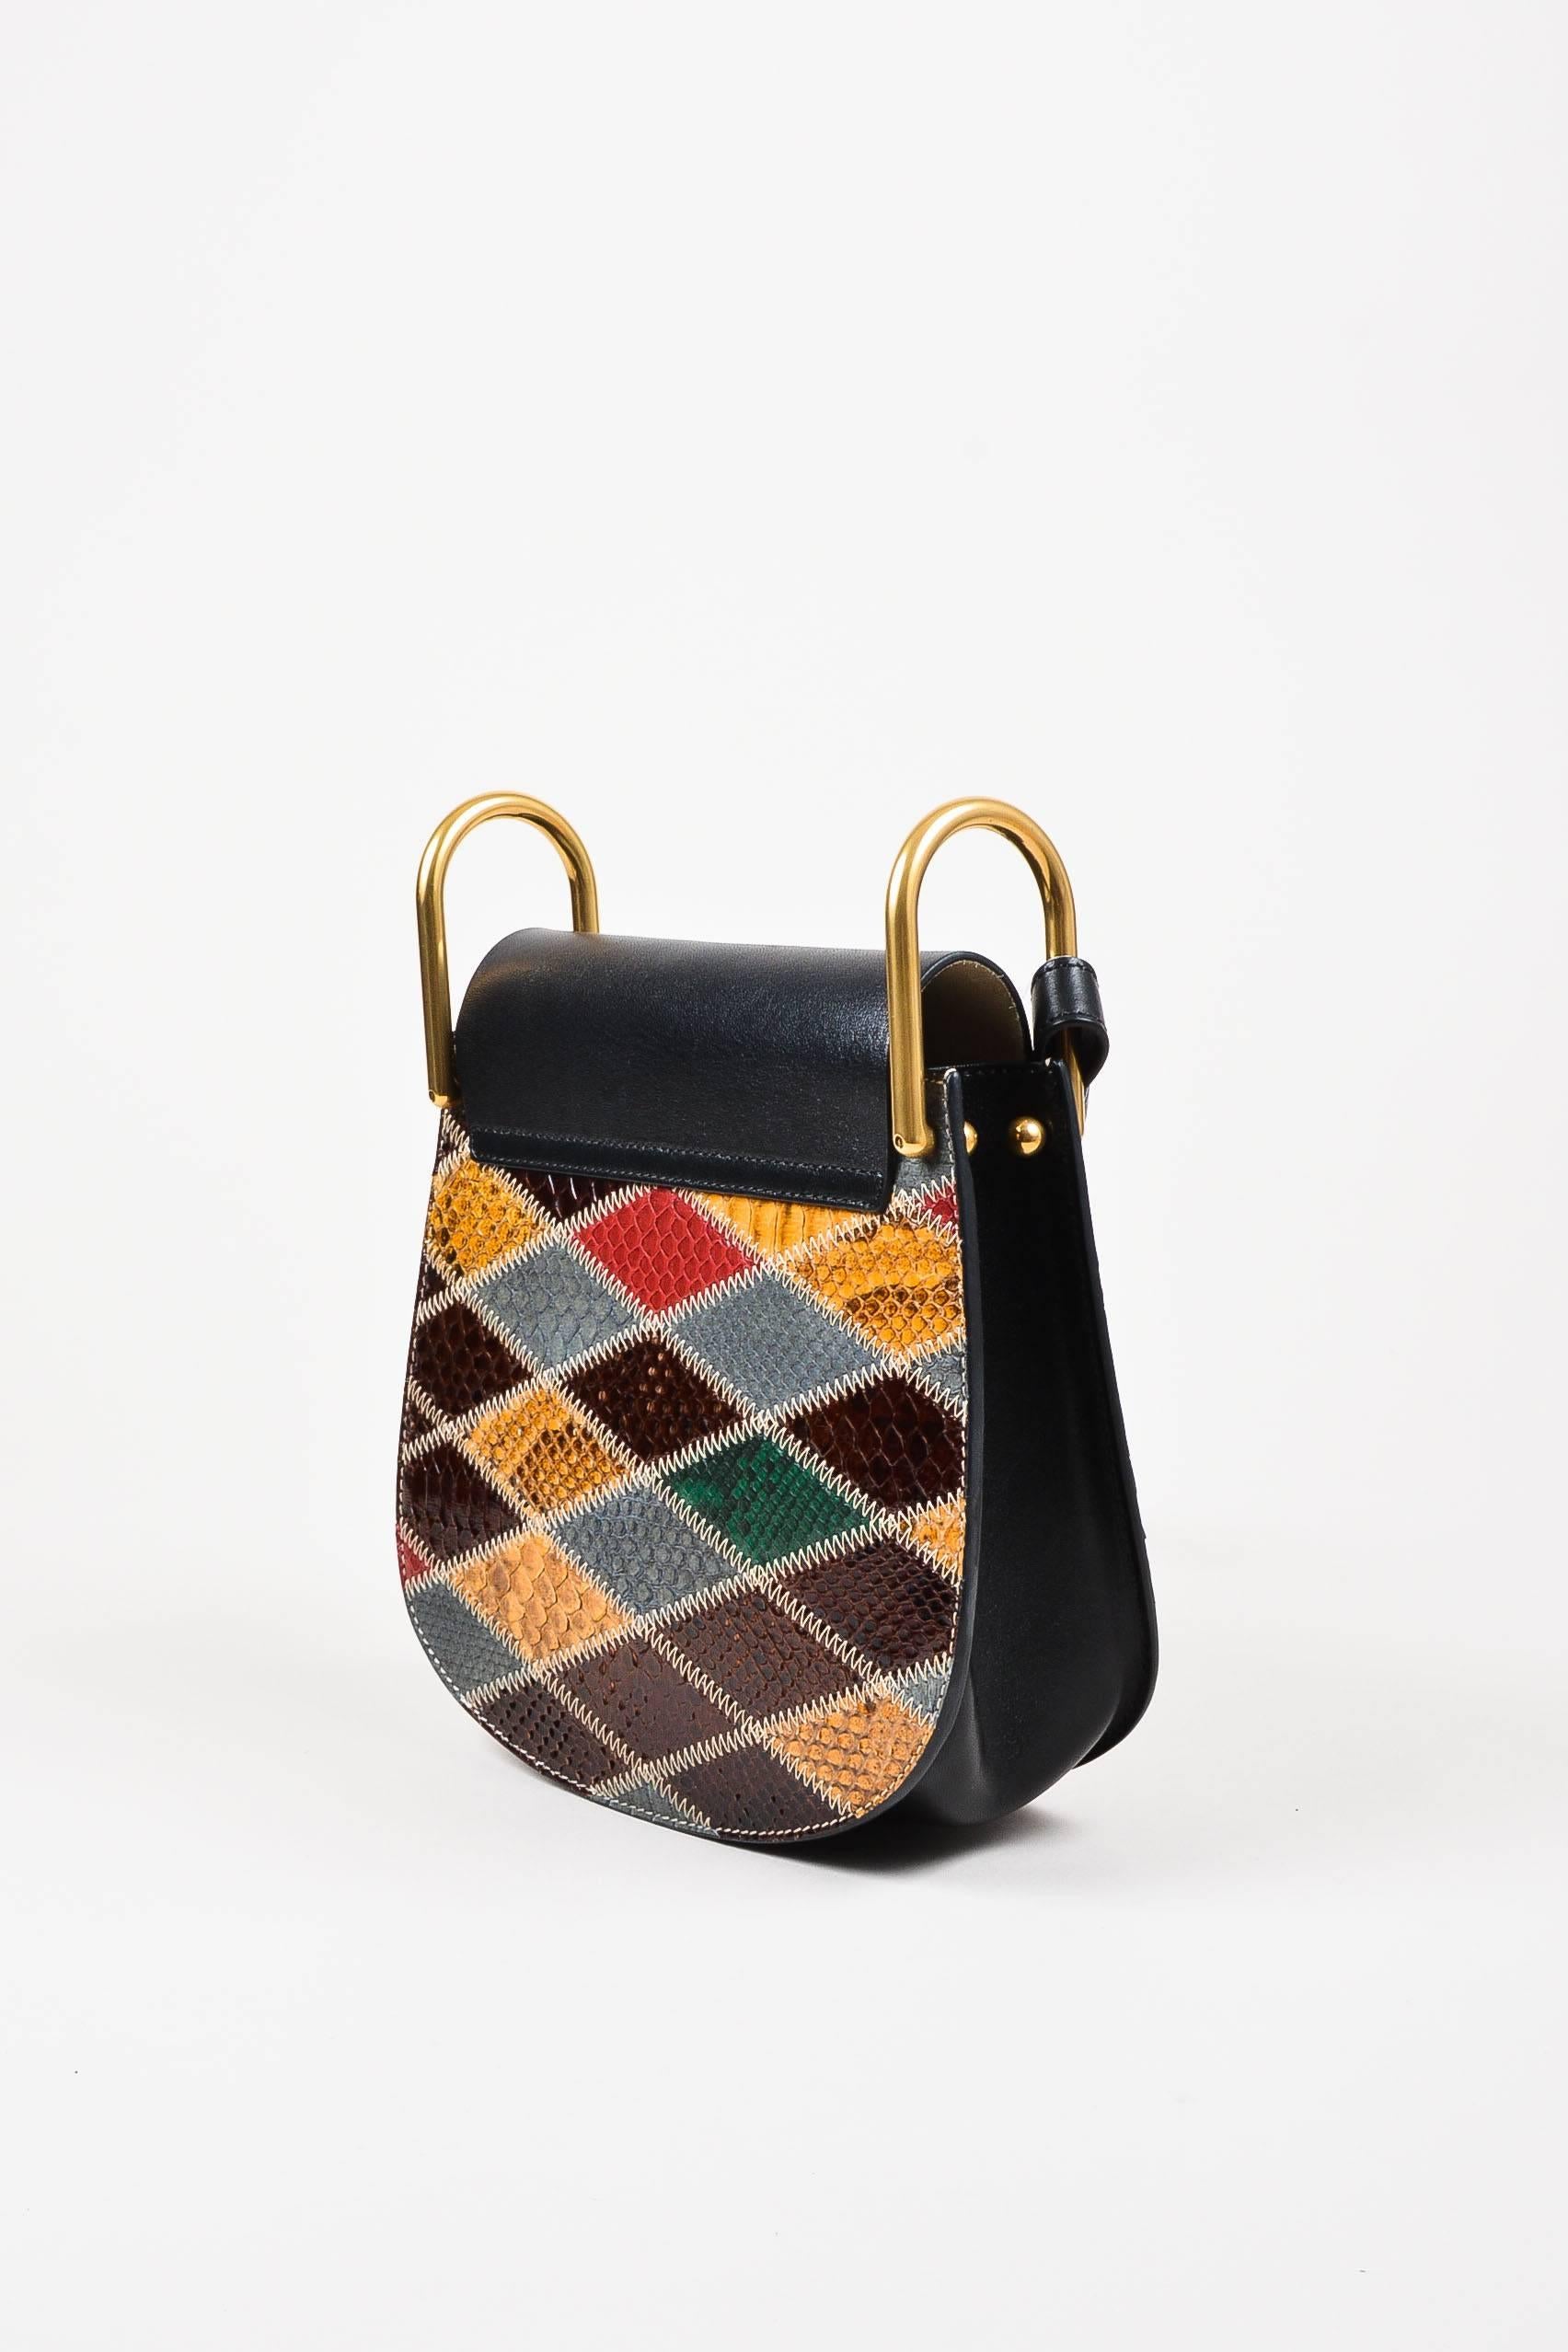 Retails at $3250. Comes in dust bag. "Hudson" shoulder bag is made from black leather featuring patchwork python panels. Shoulder strap attaches with oversized gold-tone rings. Snap closure and pocket under front flap.

Interior